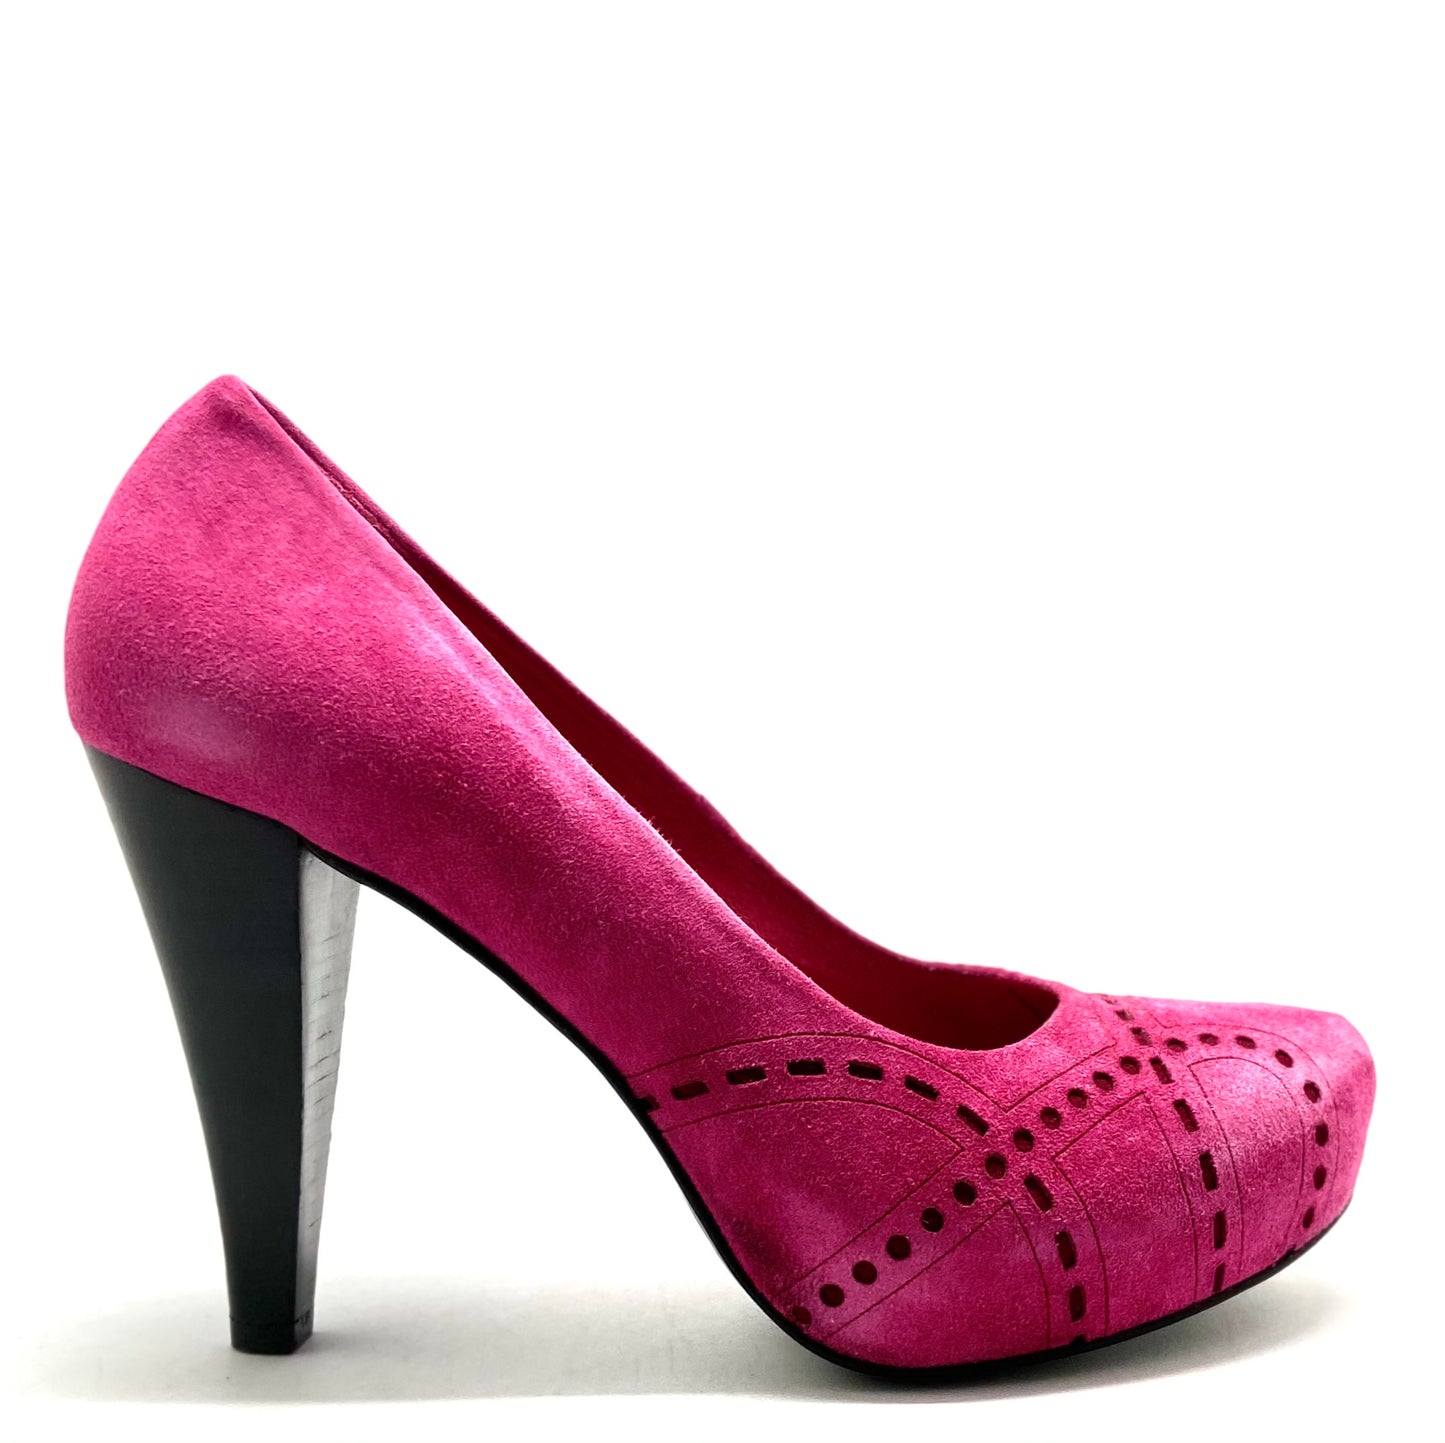 Vain Fuchsia 38-40, 41 ,42 and 43 only!